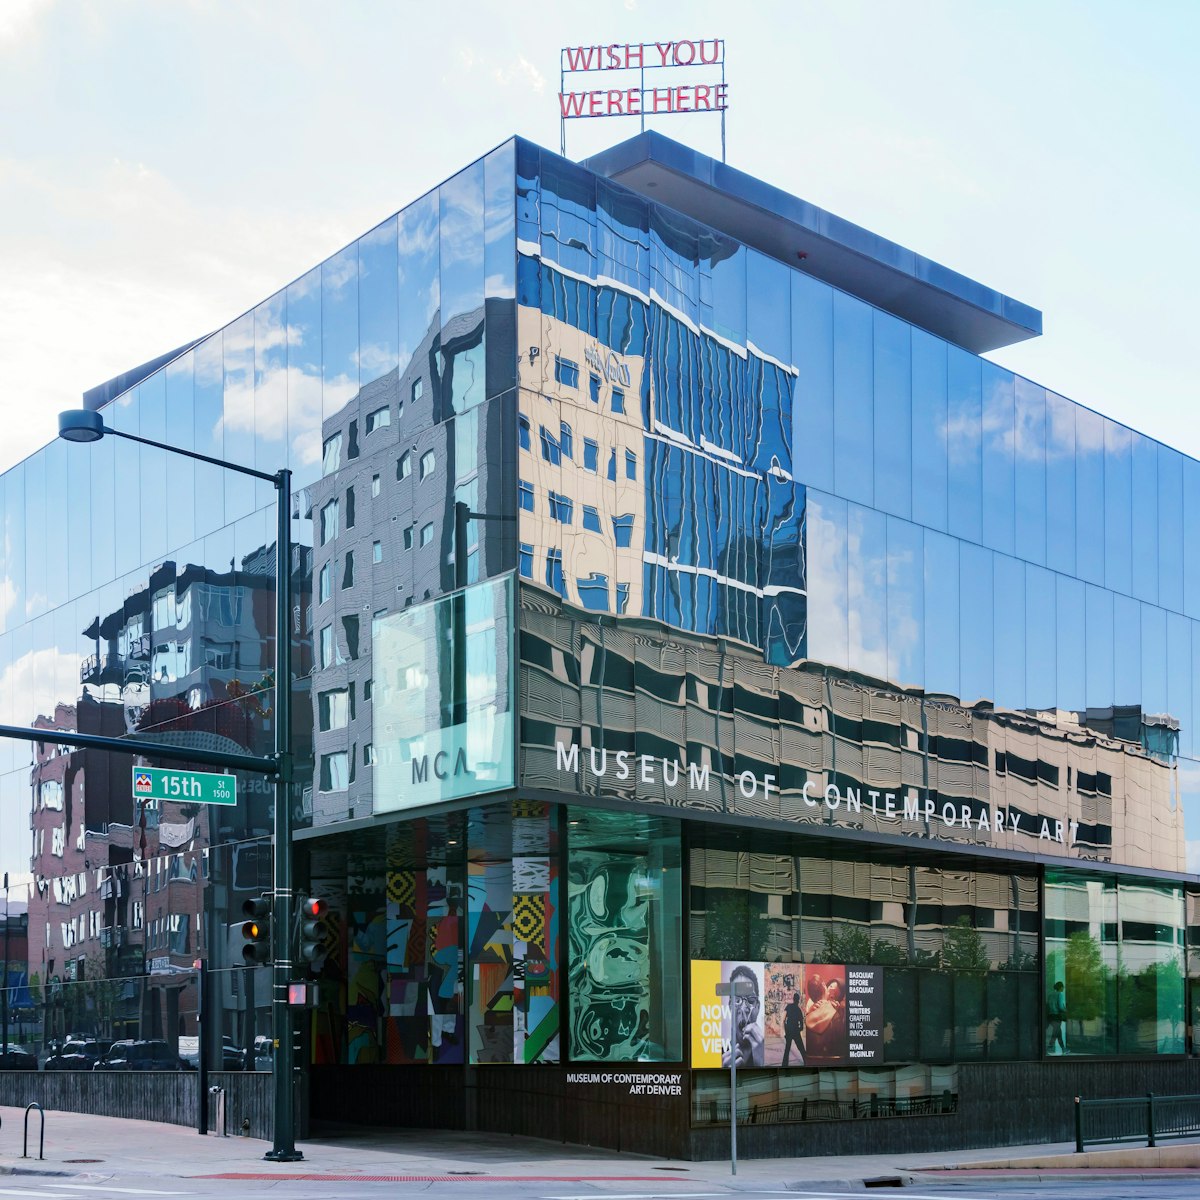 Denver, MAY 3: Exterior view of the Museum of Contemporary Art on MAY 3, 2017 at Denver, Colorado; Shutterstock ID 1150914233; your: Bridget Brown; gl: 65050; netsuite: Online Editorial; full: POI Image Update